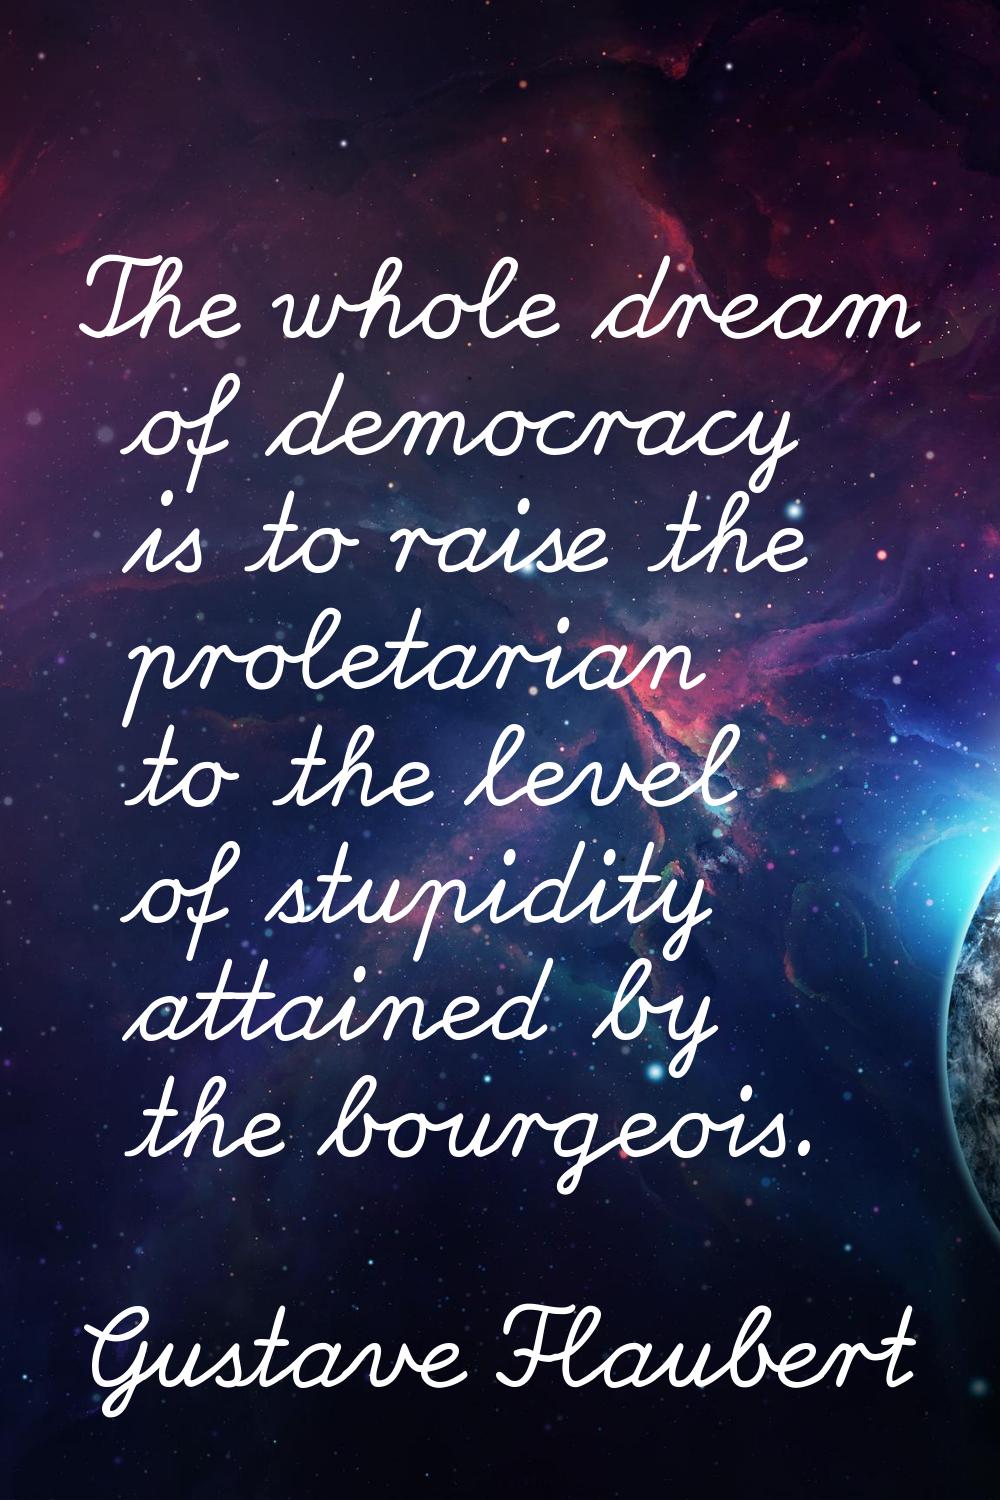 The whole dream of democracy is to raise the proletarian to the level of stupidity attained by the 